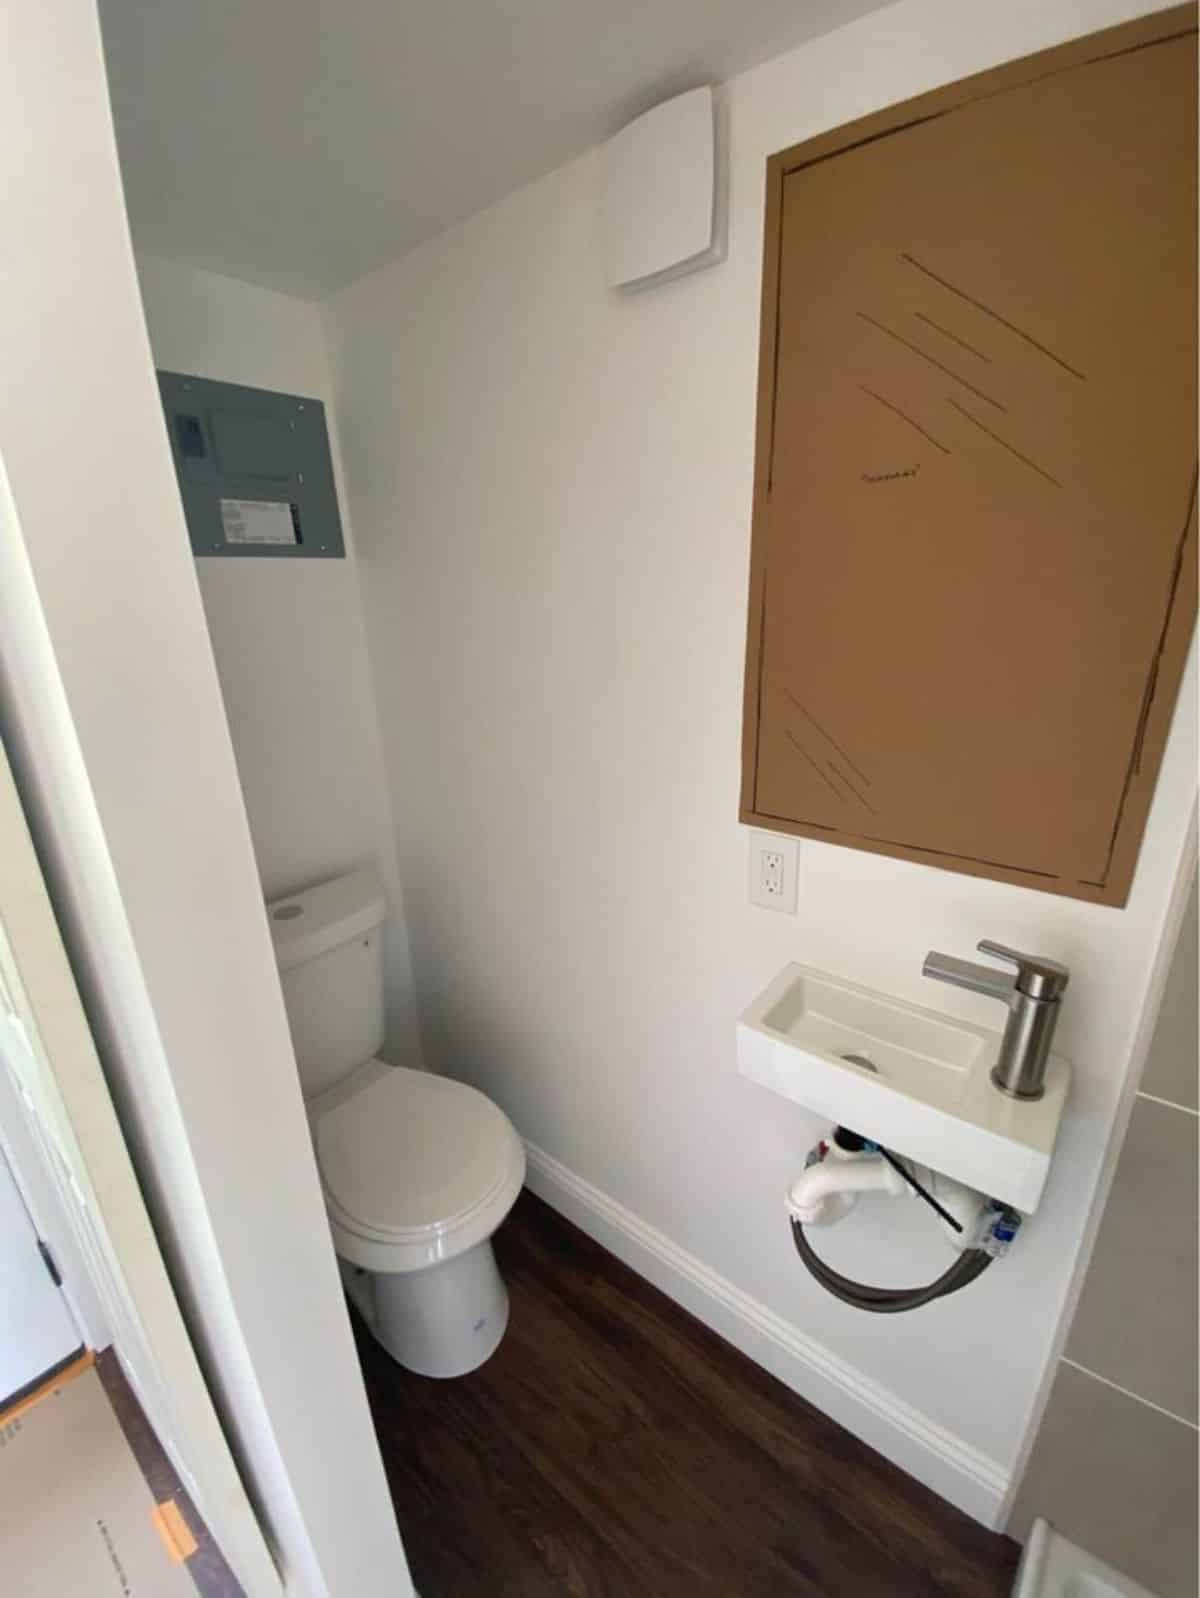 standard toilet can be converted into composting toilet in bathroom